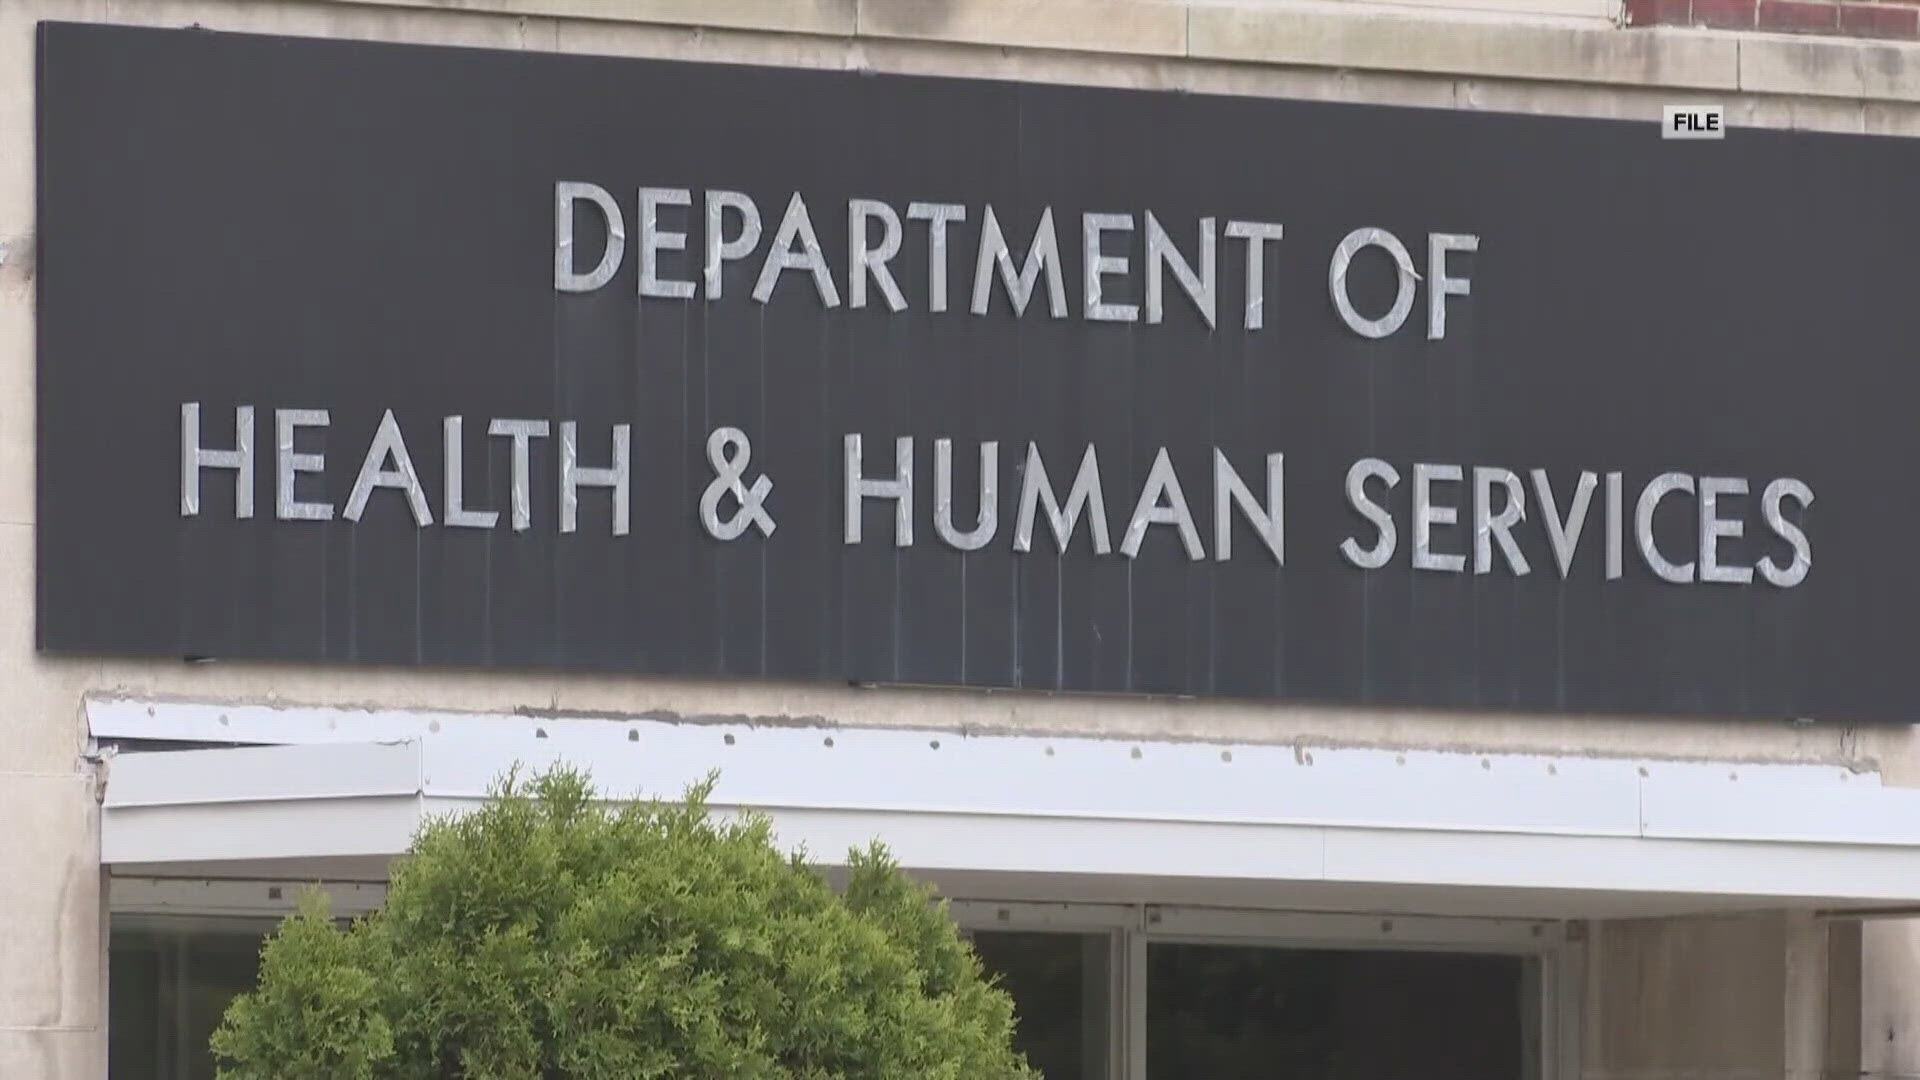 Earlier this year, Maine's DHHS announced several changes to restructure and reorganize to better serve children and their families.